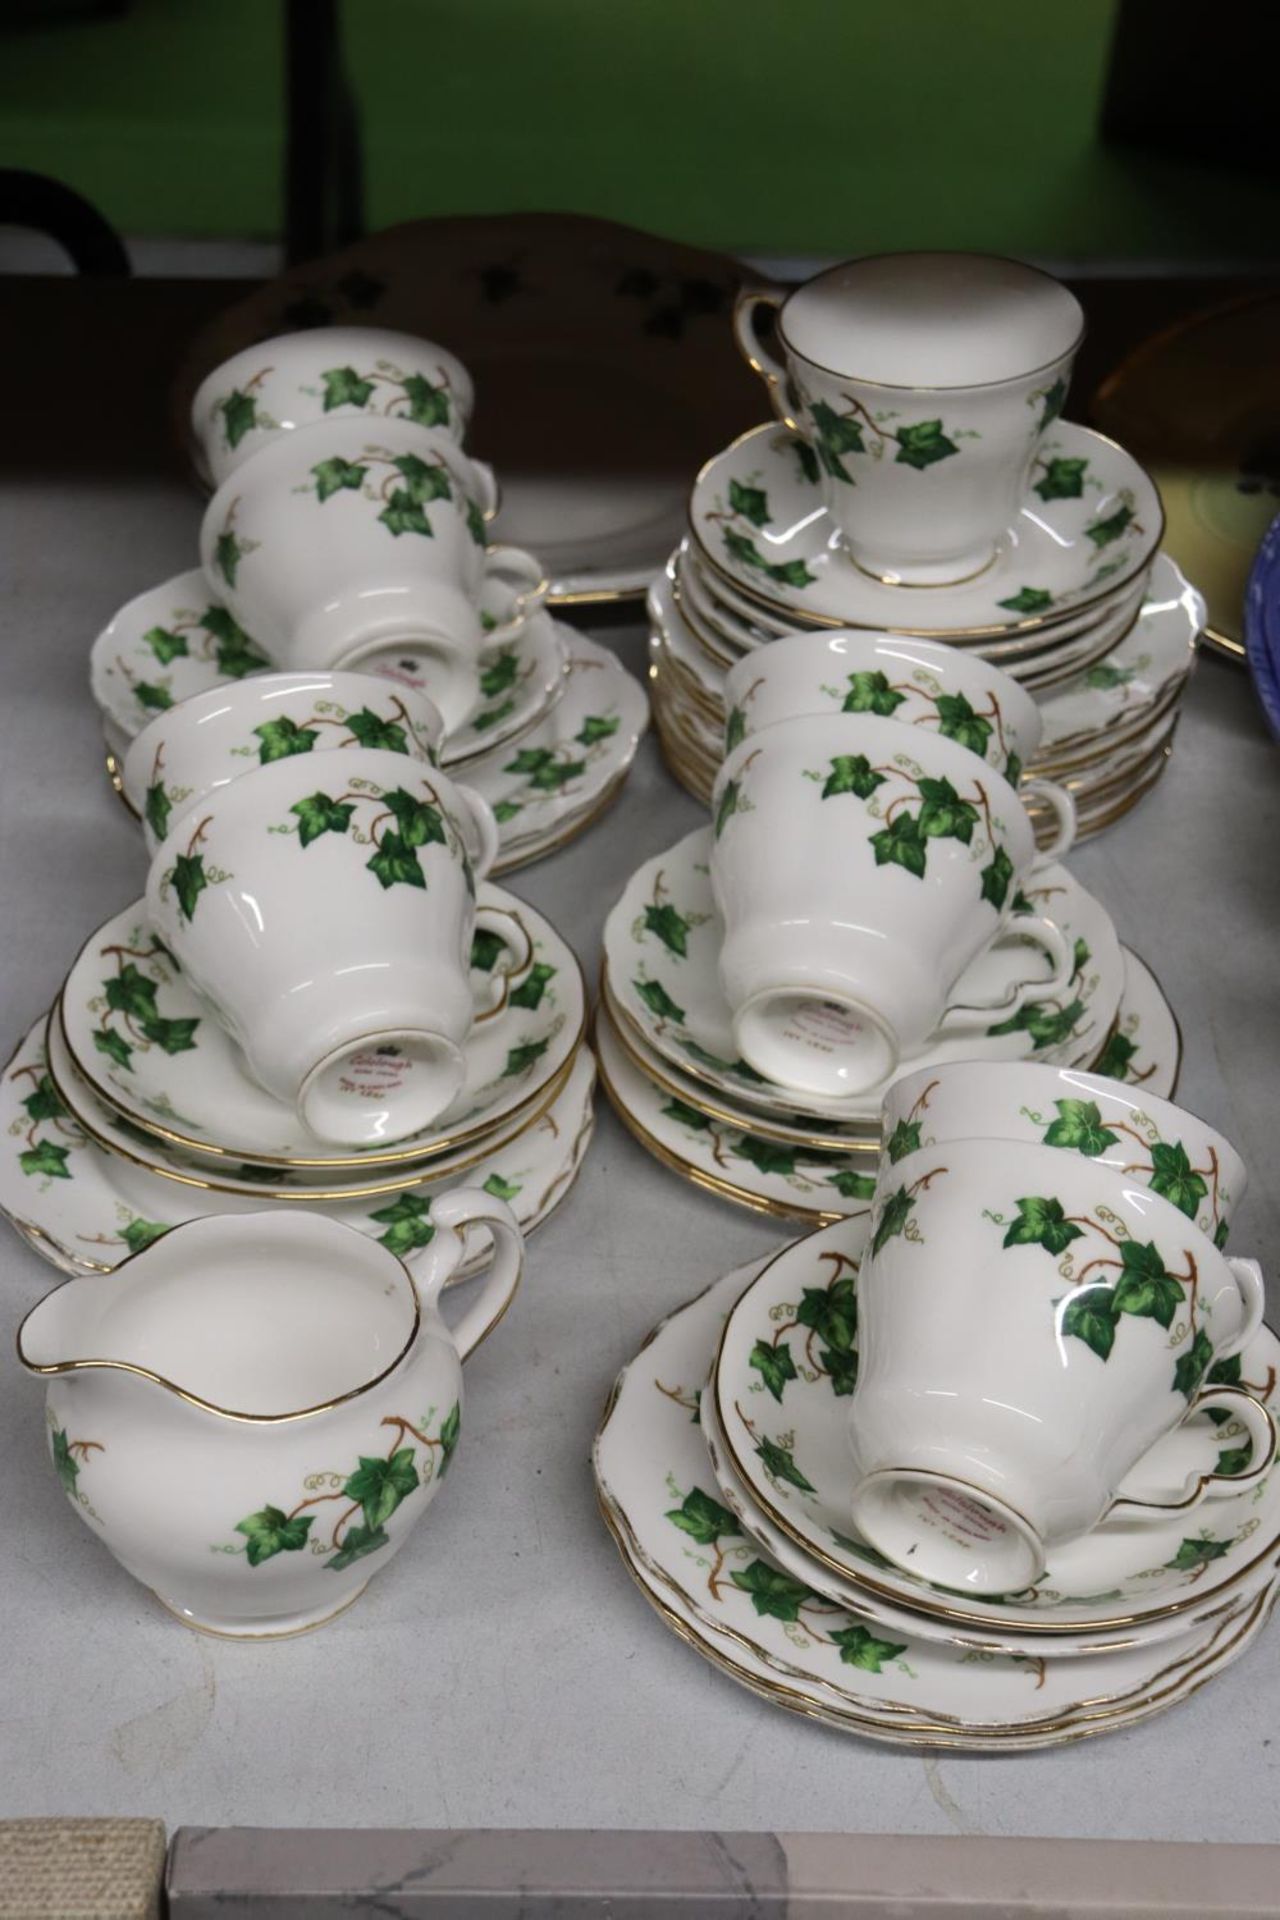 A COLCLOUGH 'IVY LEAF' PART TEASET TO INCLUDE CAKE PLATES, A CREAM JUG, CUPS, SAUCERS AND SIDE